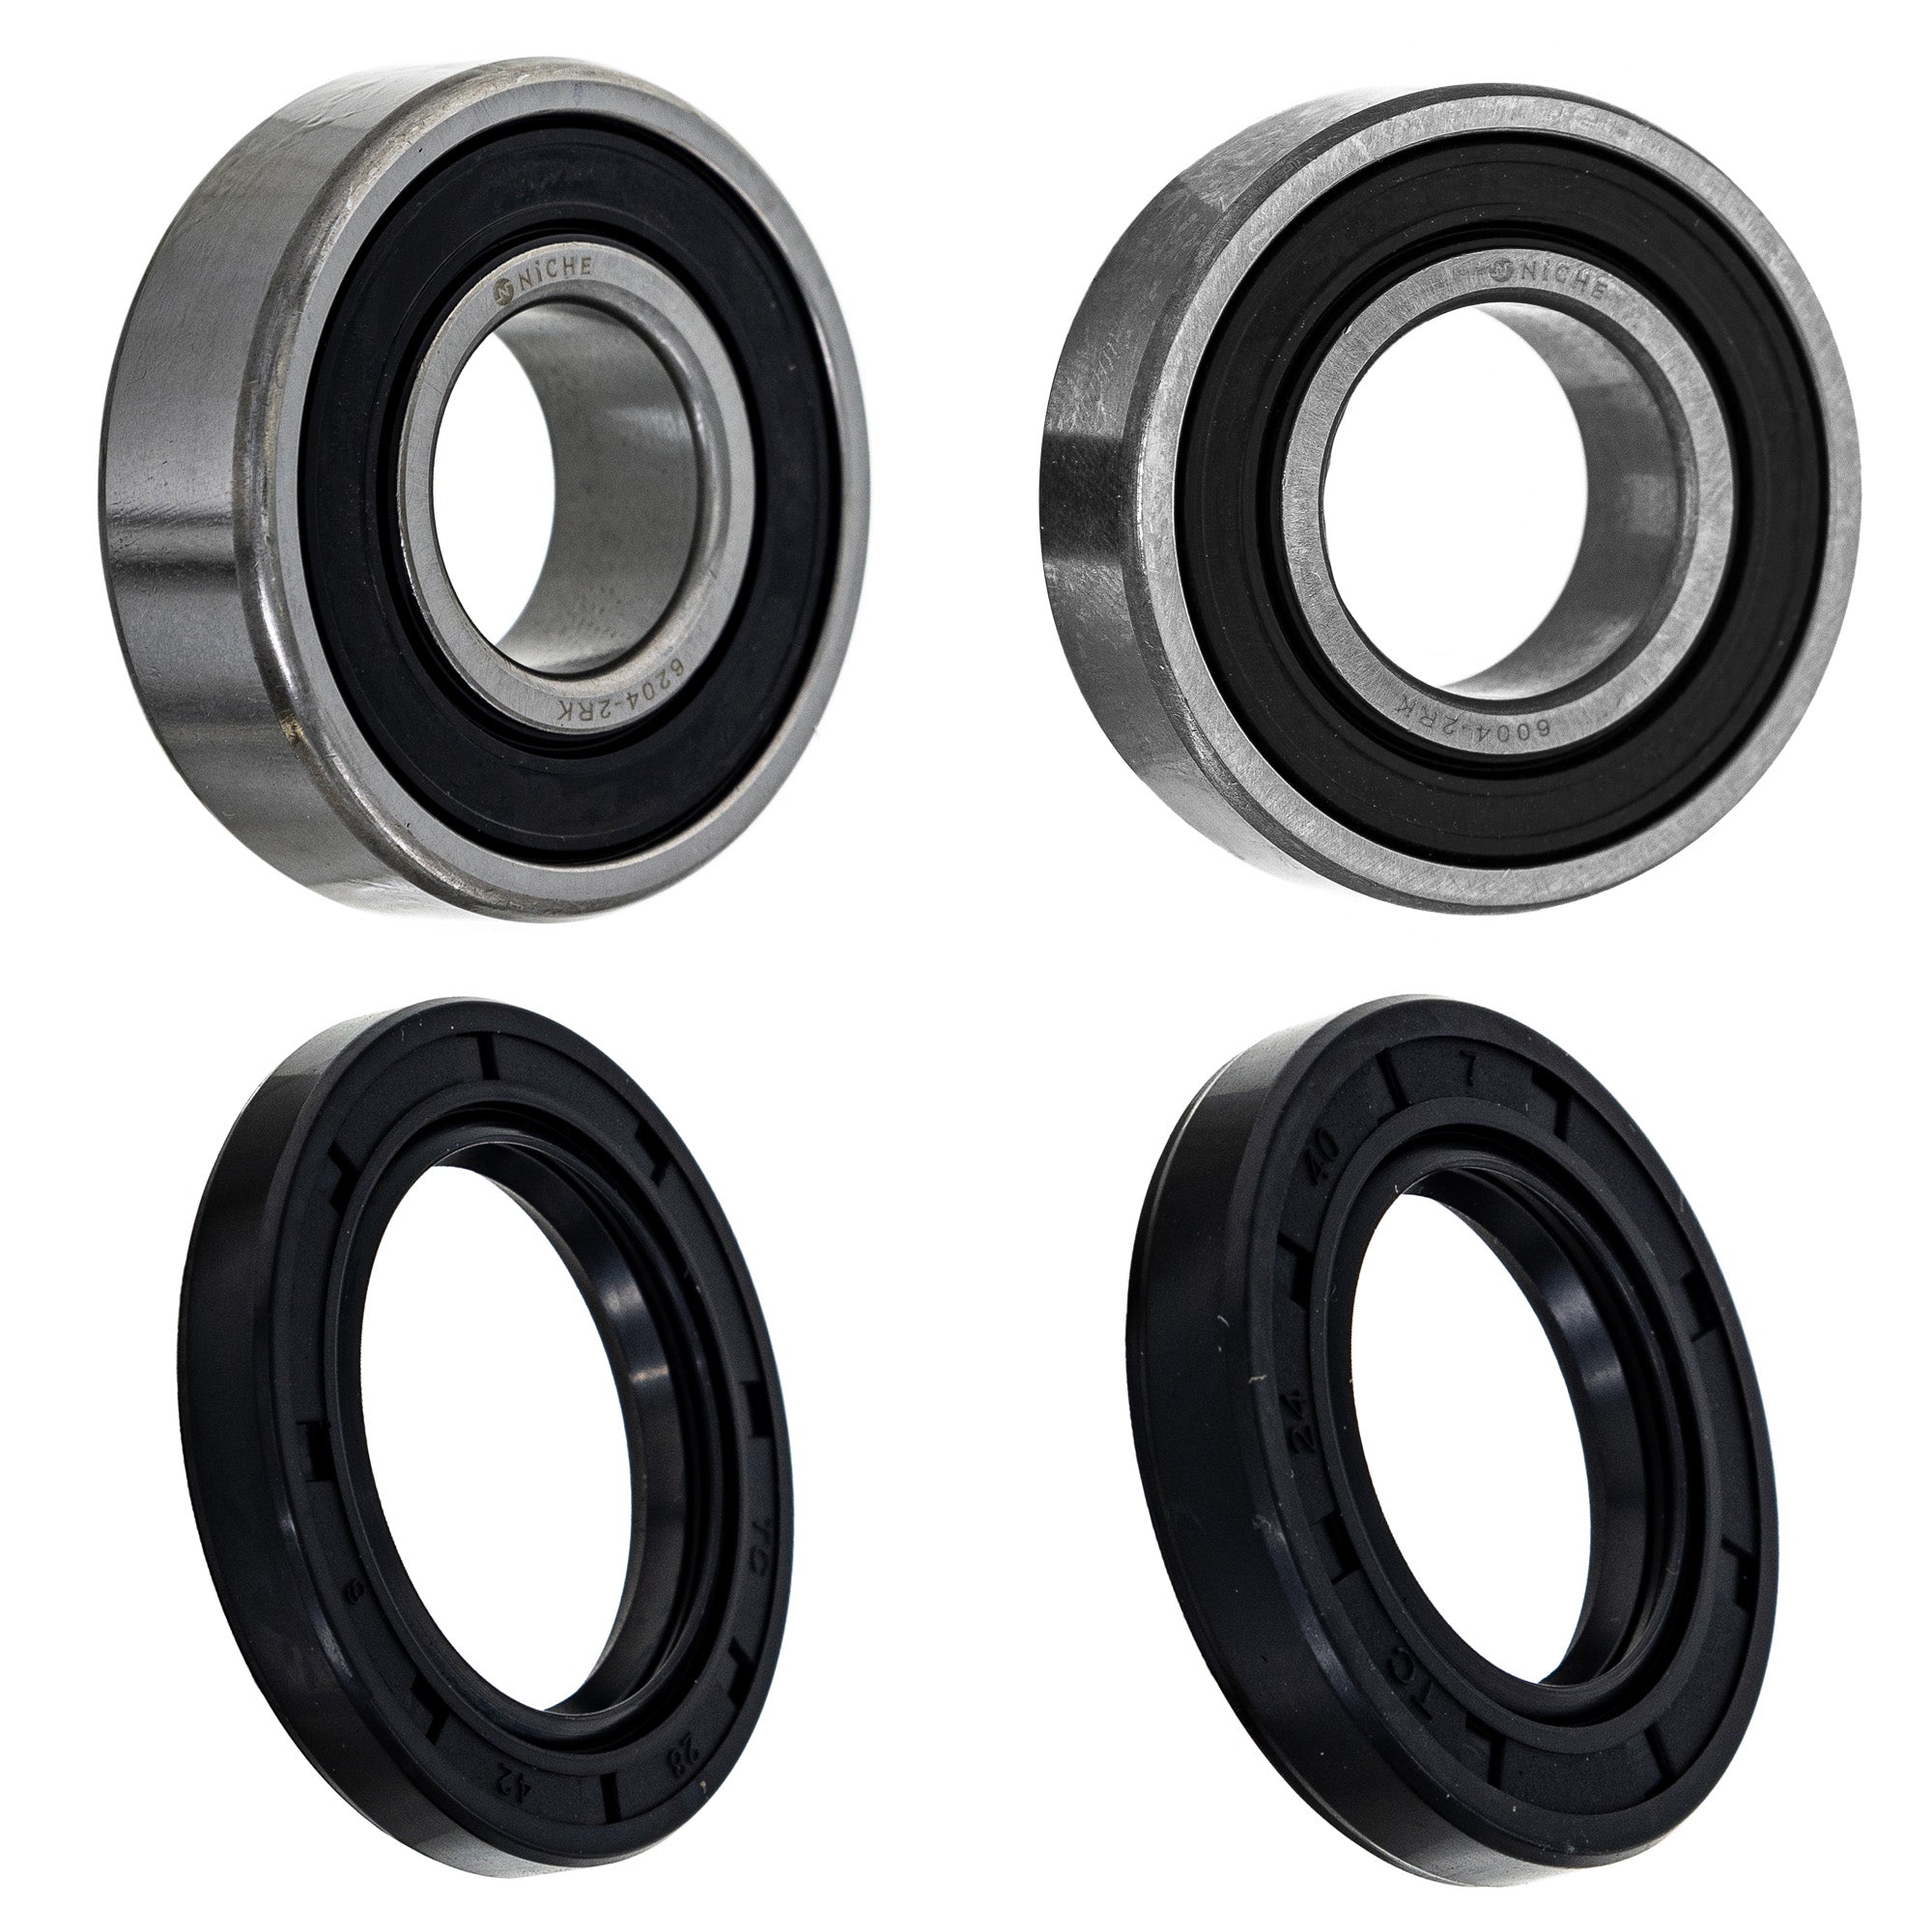 Wheel Bearing Seal Kit for zOTHER Grizzly DS NICHE MK1008862